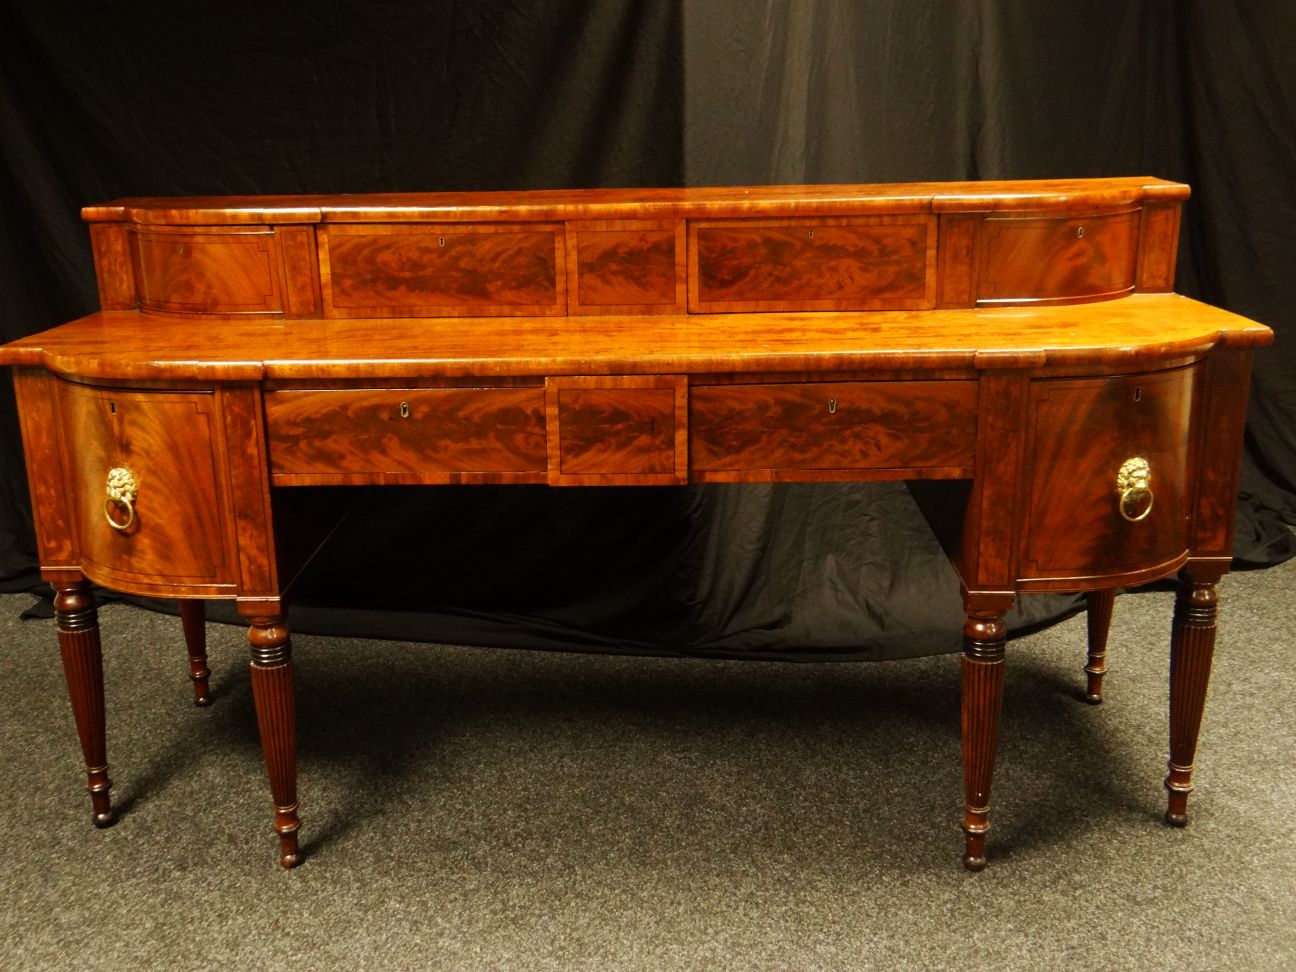 A fine William IV mahogany with boxwood stringing, Scottish breakfront sideboard, on four tapered